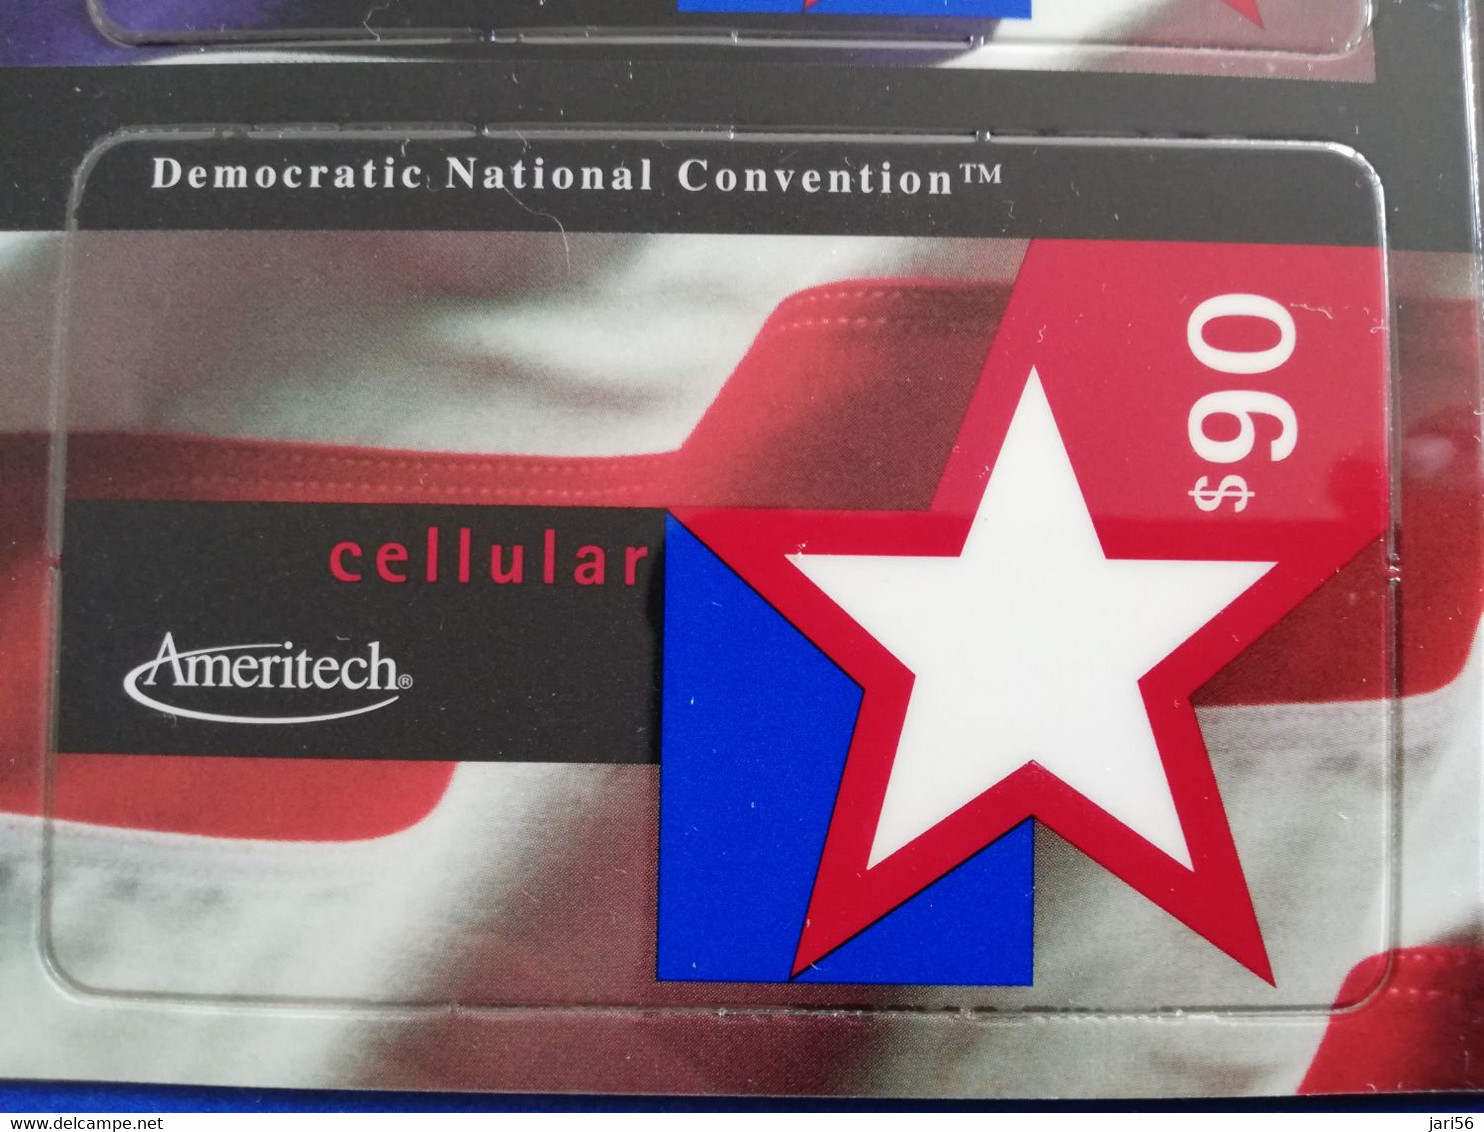 UNITED STATES DEMOCRATIC NATIONAL CONVENTION CHICAGO '96  7 CARDS /FOLDER    MINT   LIMITED EDITION ** 5637**